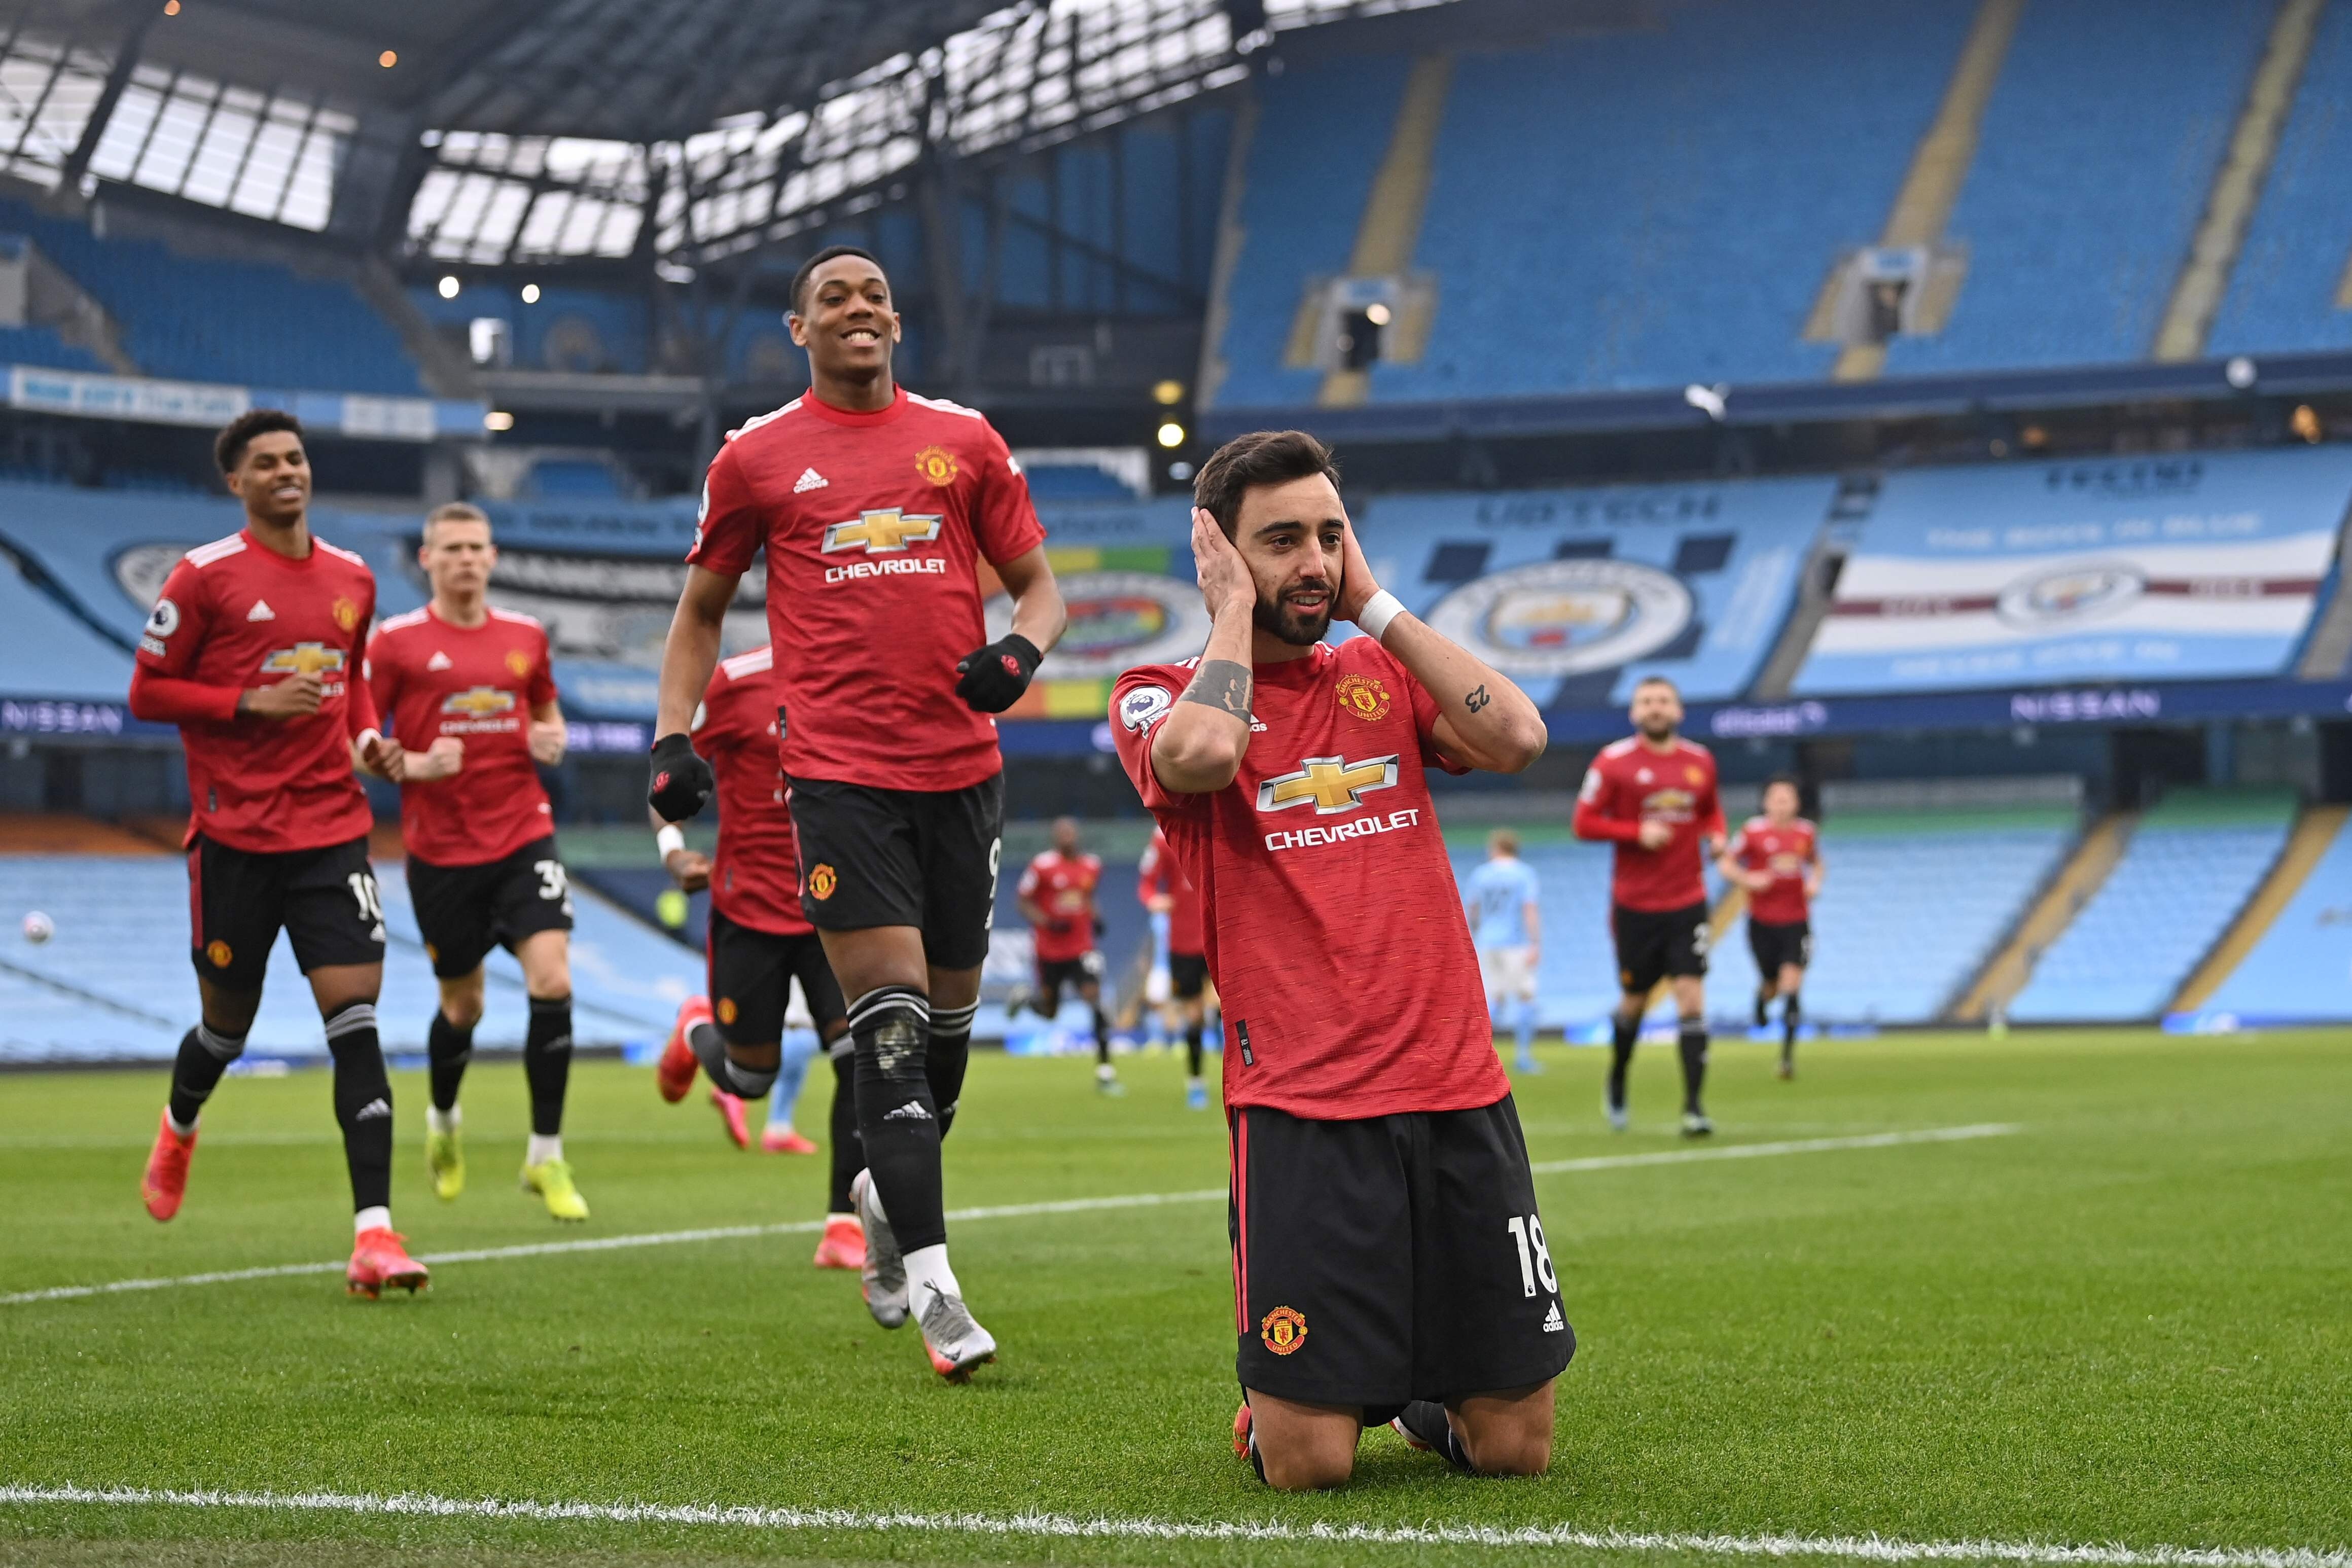 Manchester United's Portuguese midfielder Bruno Fernandes celebrates with teammates after scoring the during the English Premier League match against Manchester City. Photo: AFP